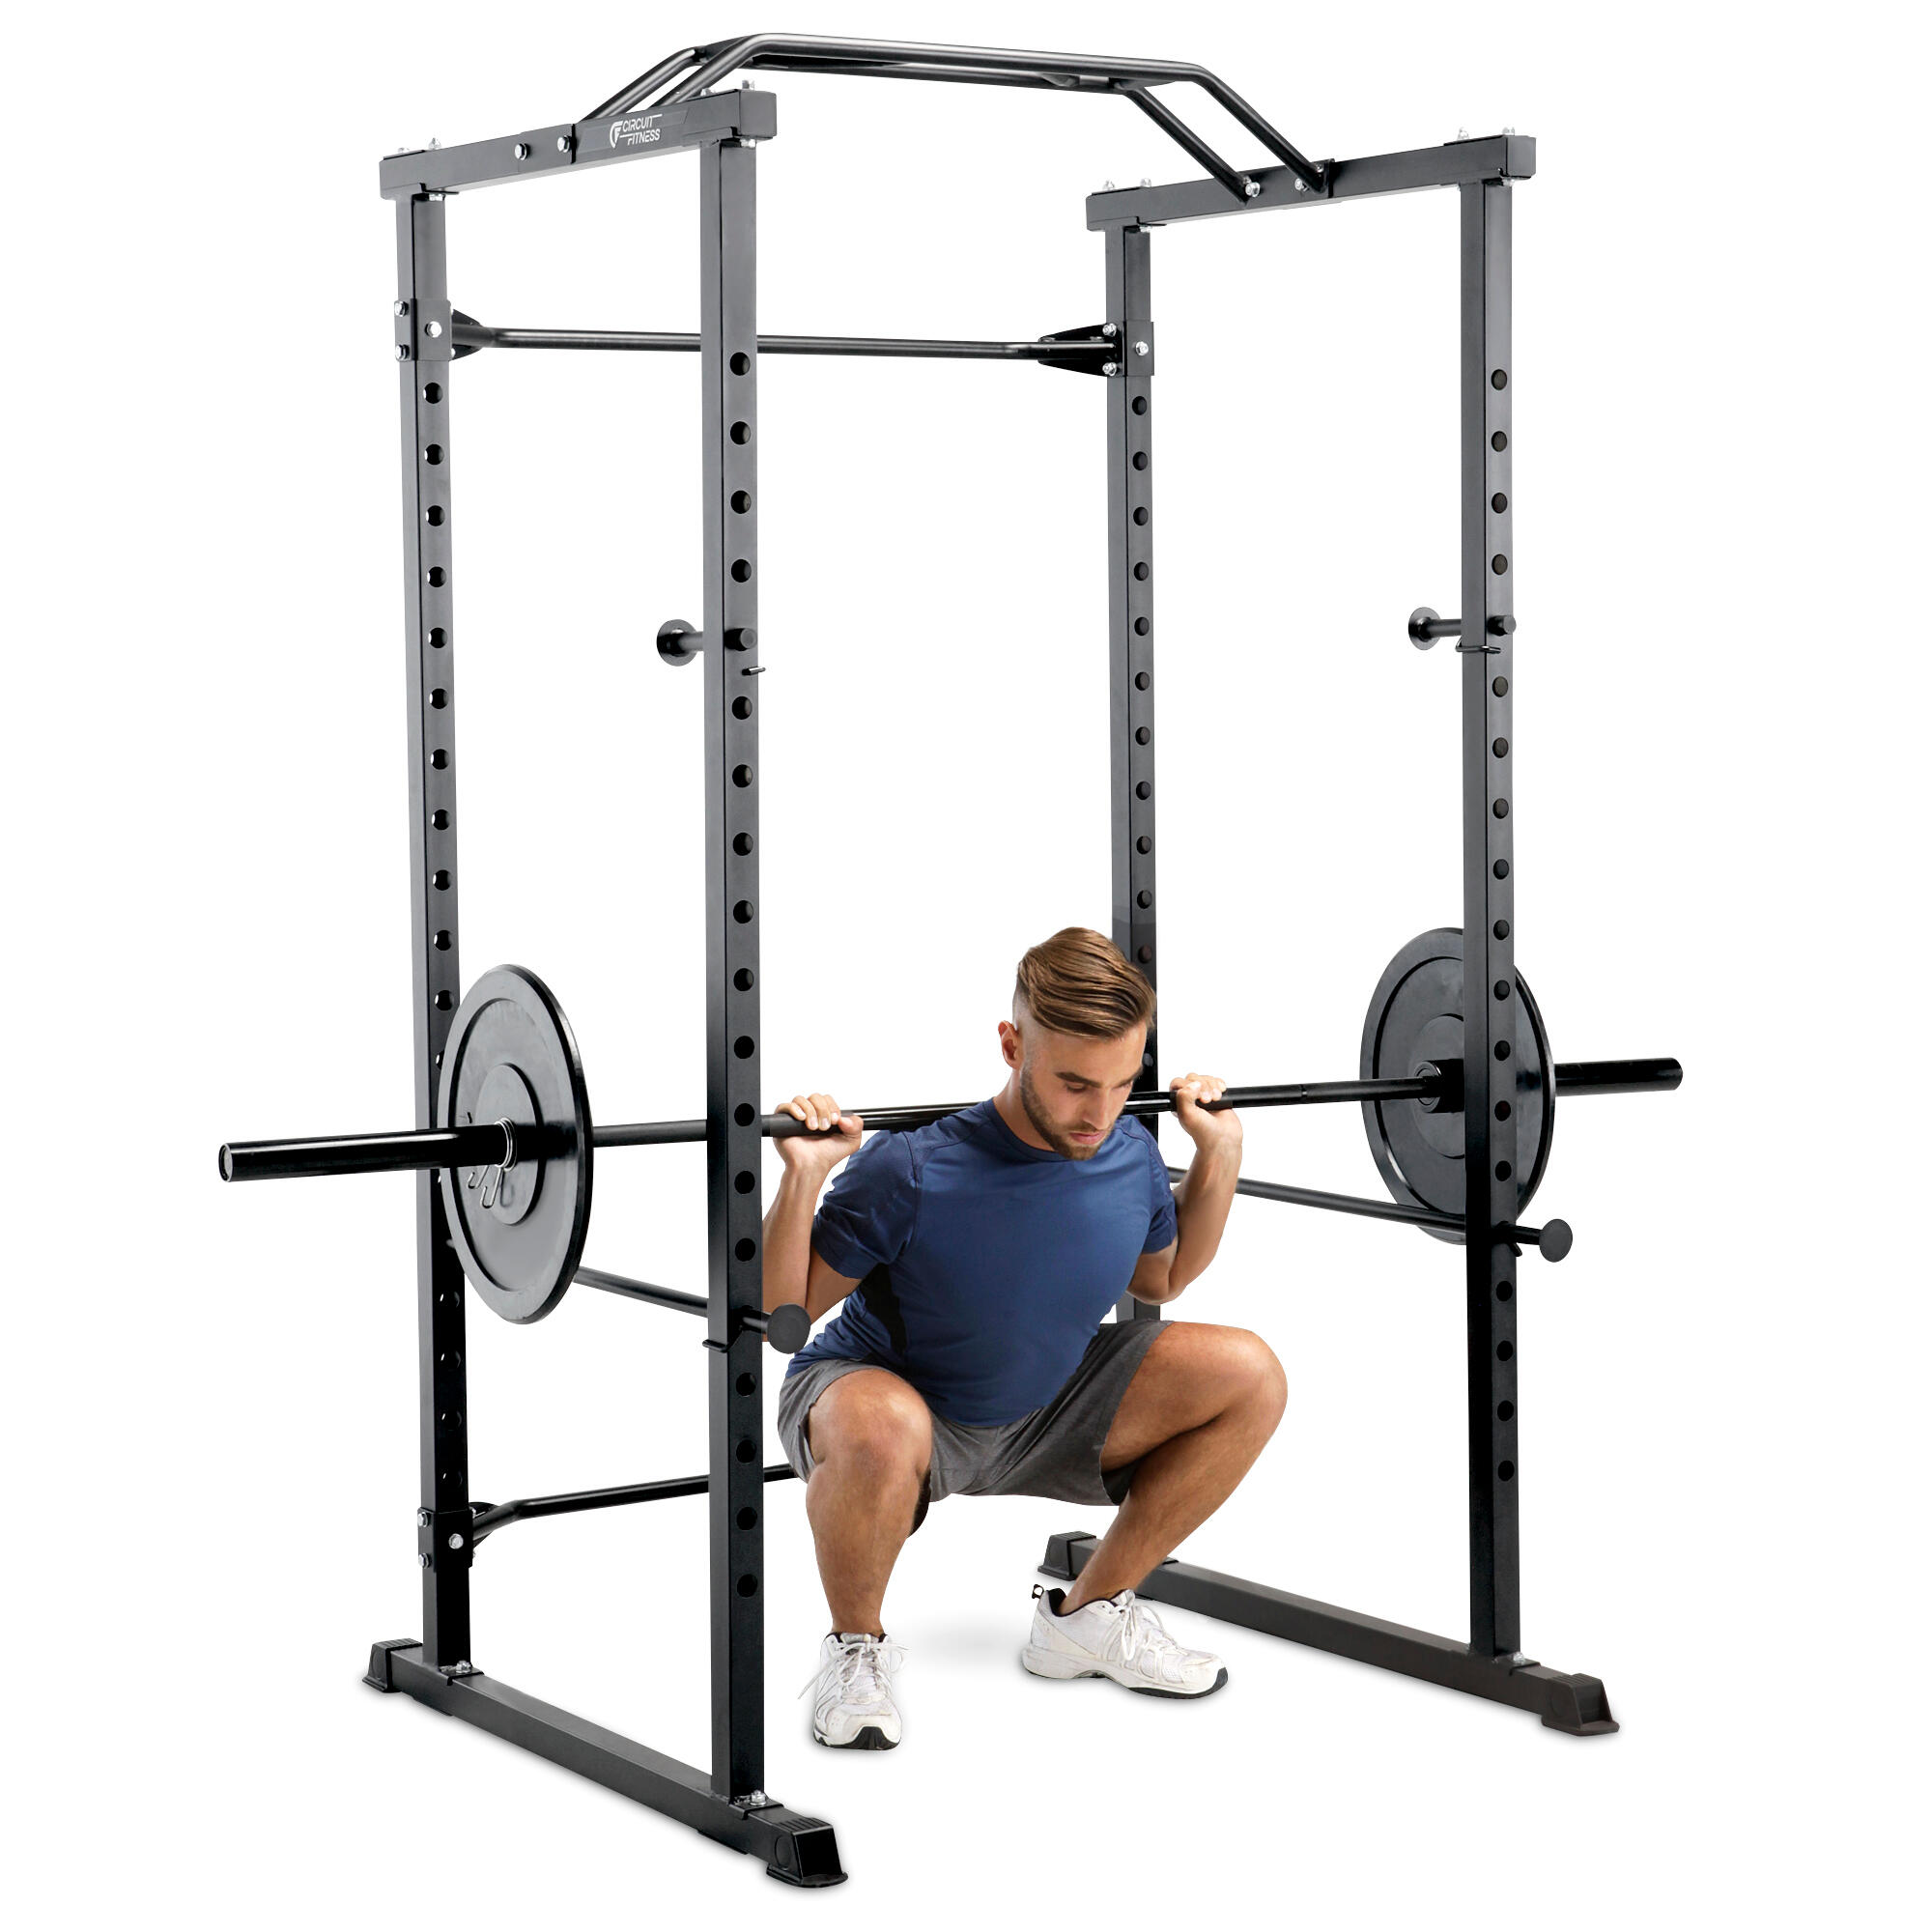 CIRCUIT FITNESS 600CG MULTI FUNCTION FITNESS CAGE 7/7